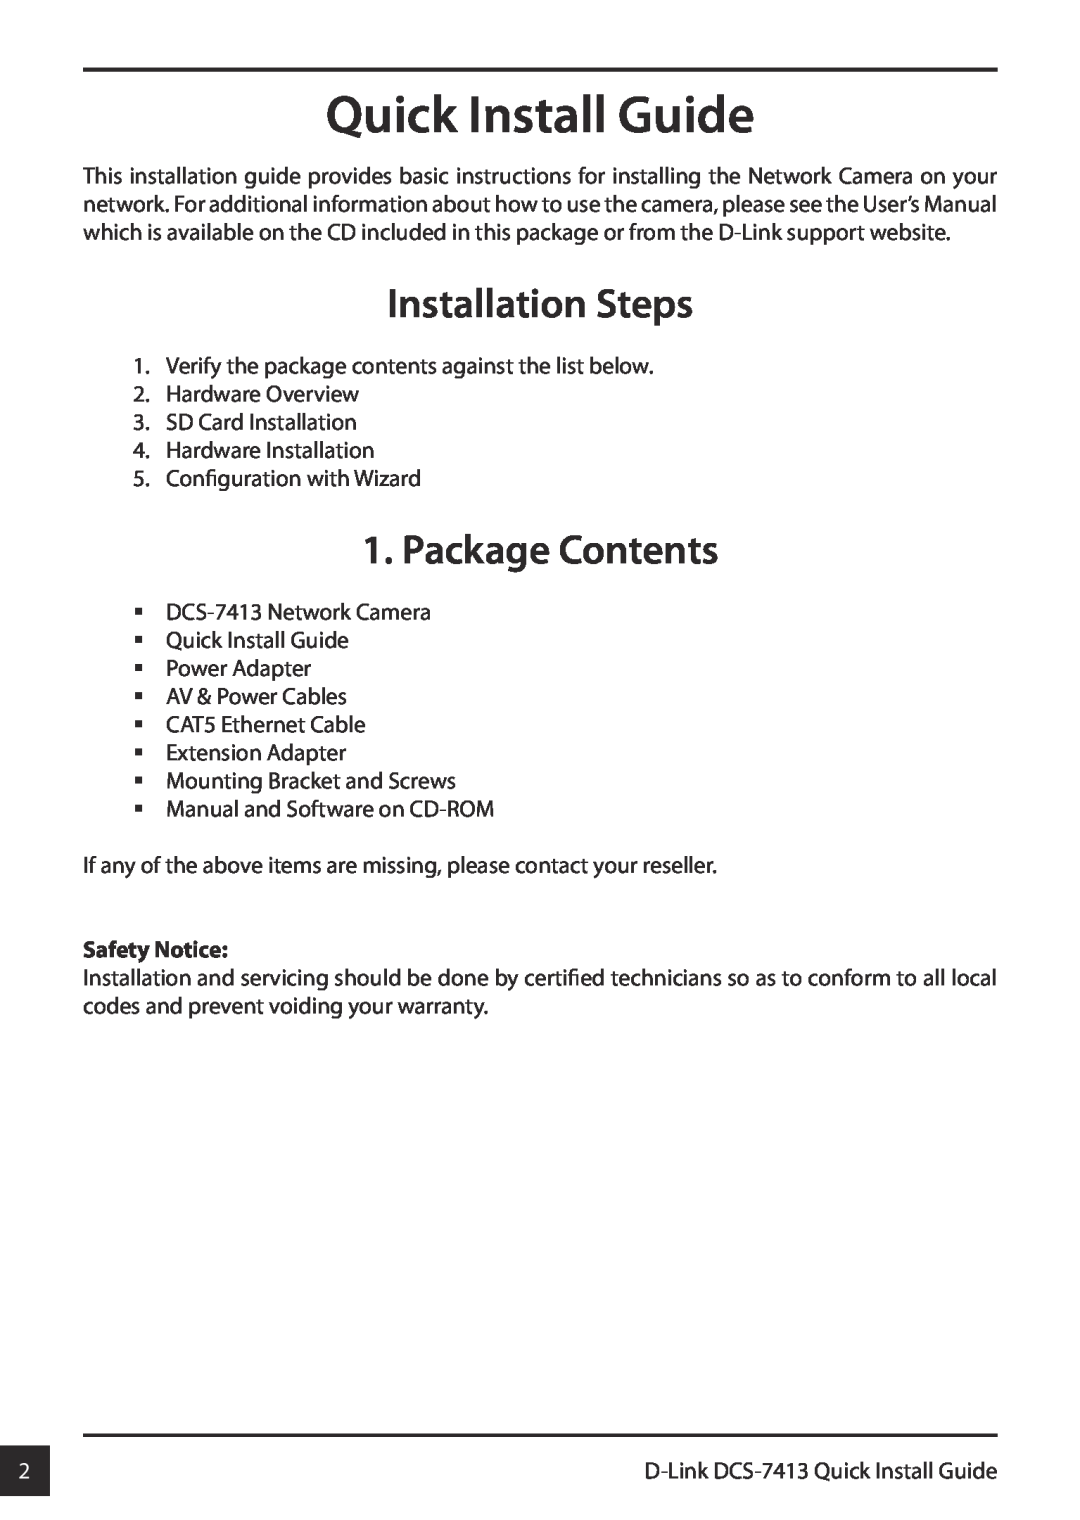 D-Link DCS-7413 manual Installation Steps, Package Contents, Safety Notice, Quick Install Guide 